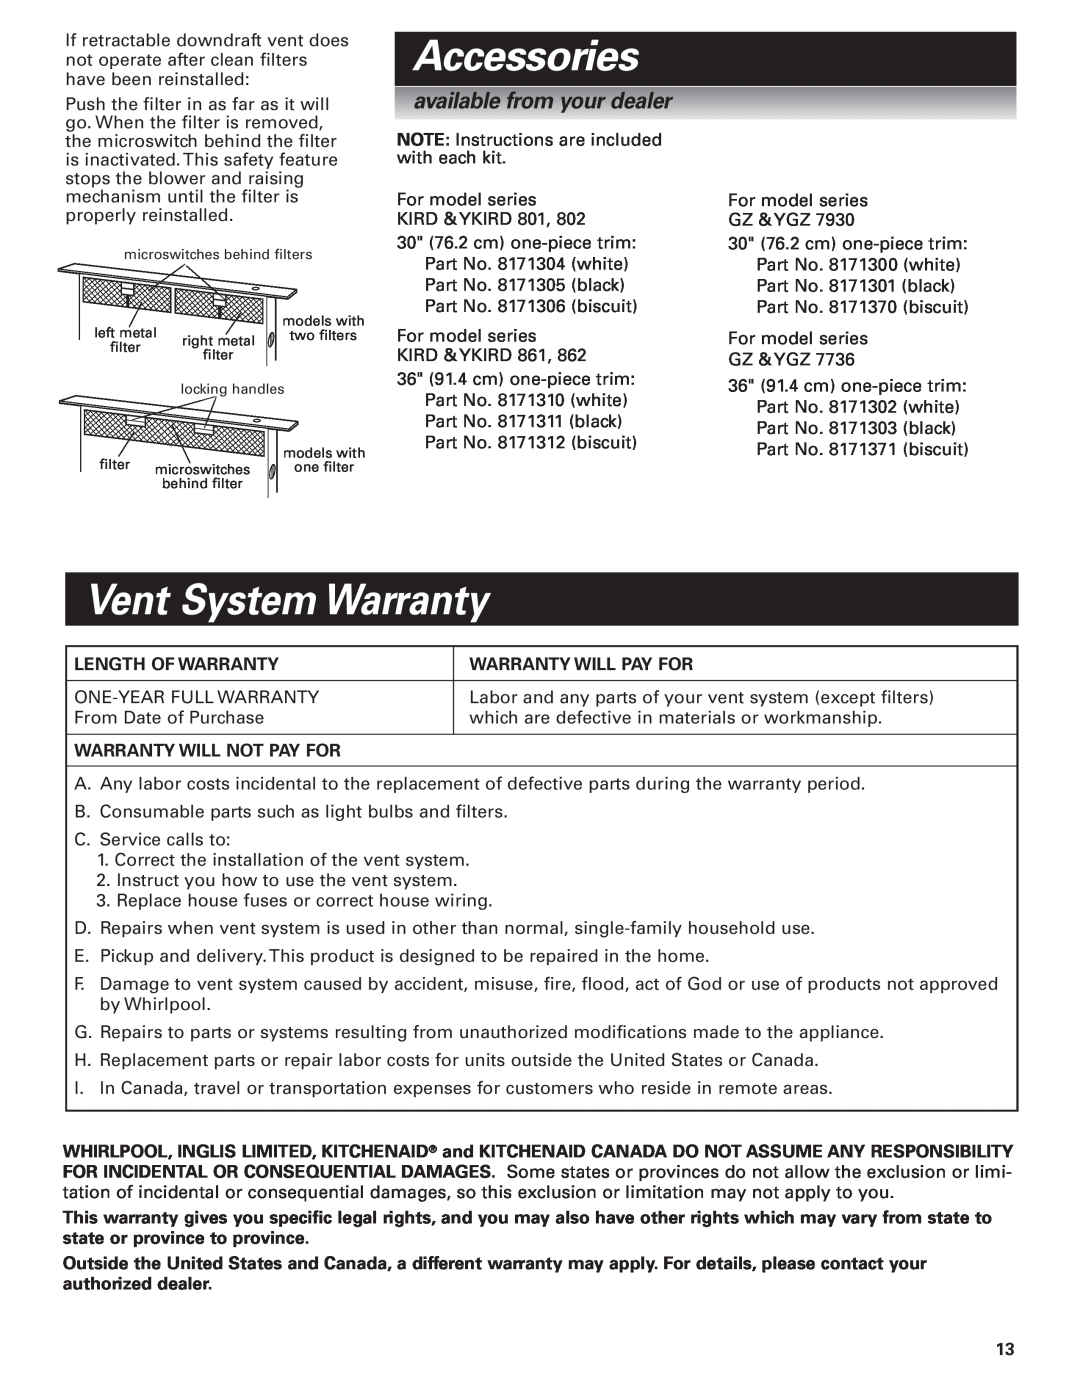 Whirlpool GZ7930XGS0 Accessories, Vent System Warranty, available from your dealer, Length Of Warranty 